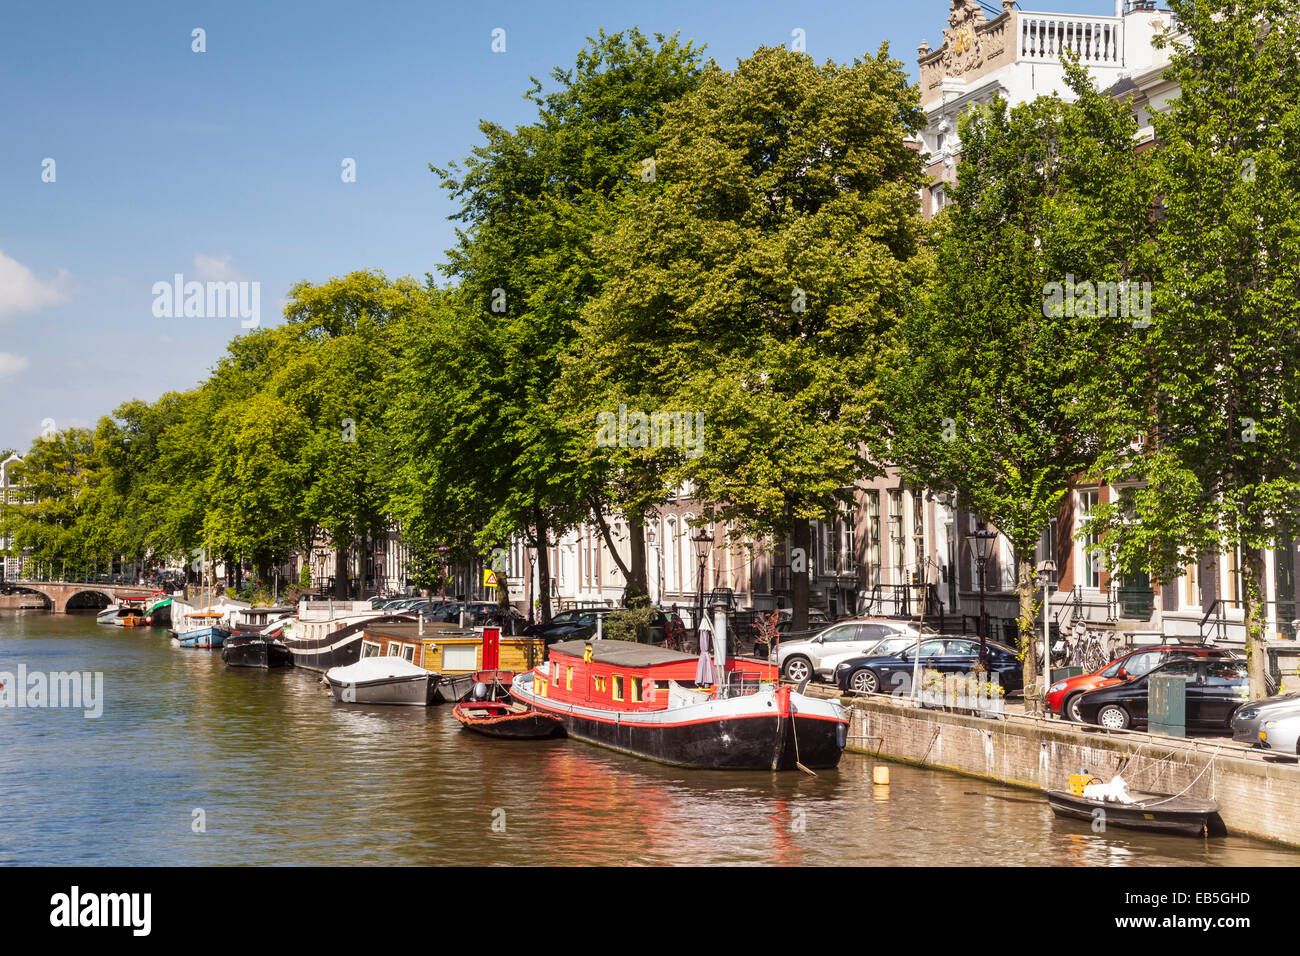 The Keizersgracht canal in Amsterdam. The area is designated as a World Heritage Site by UNESCO. Stock Photo